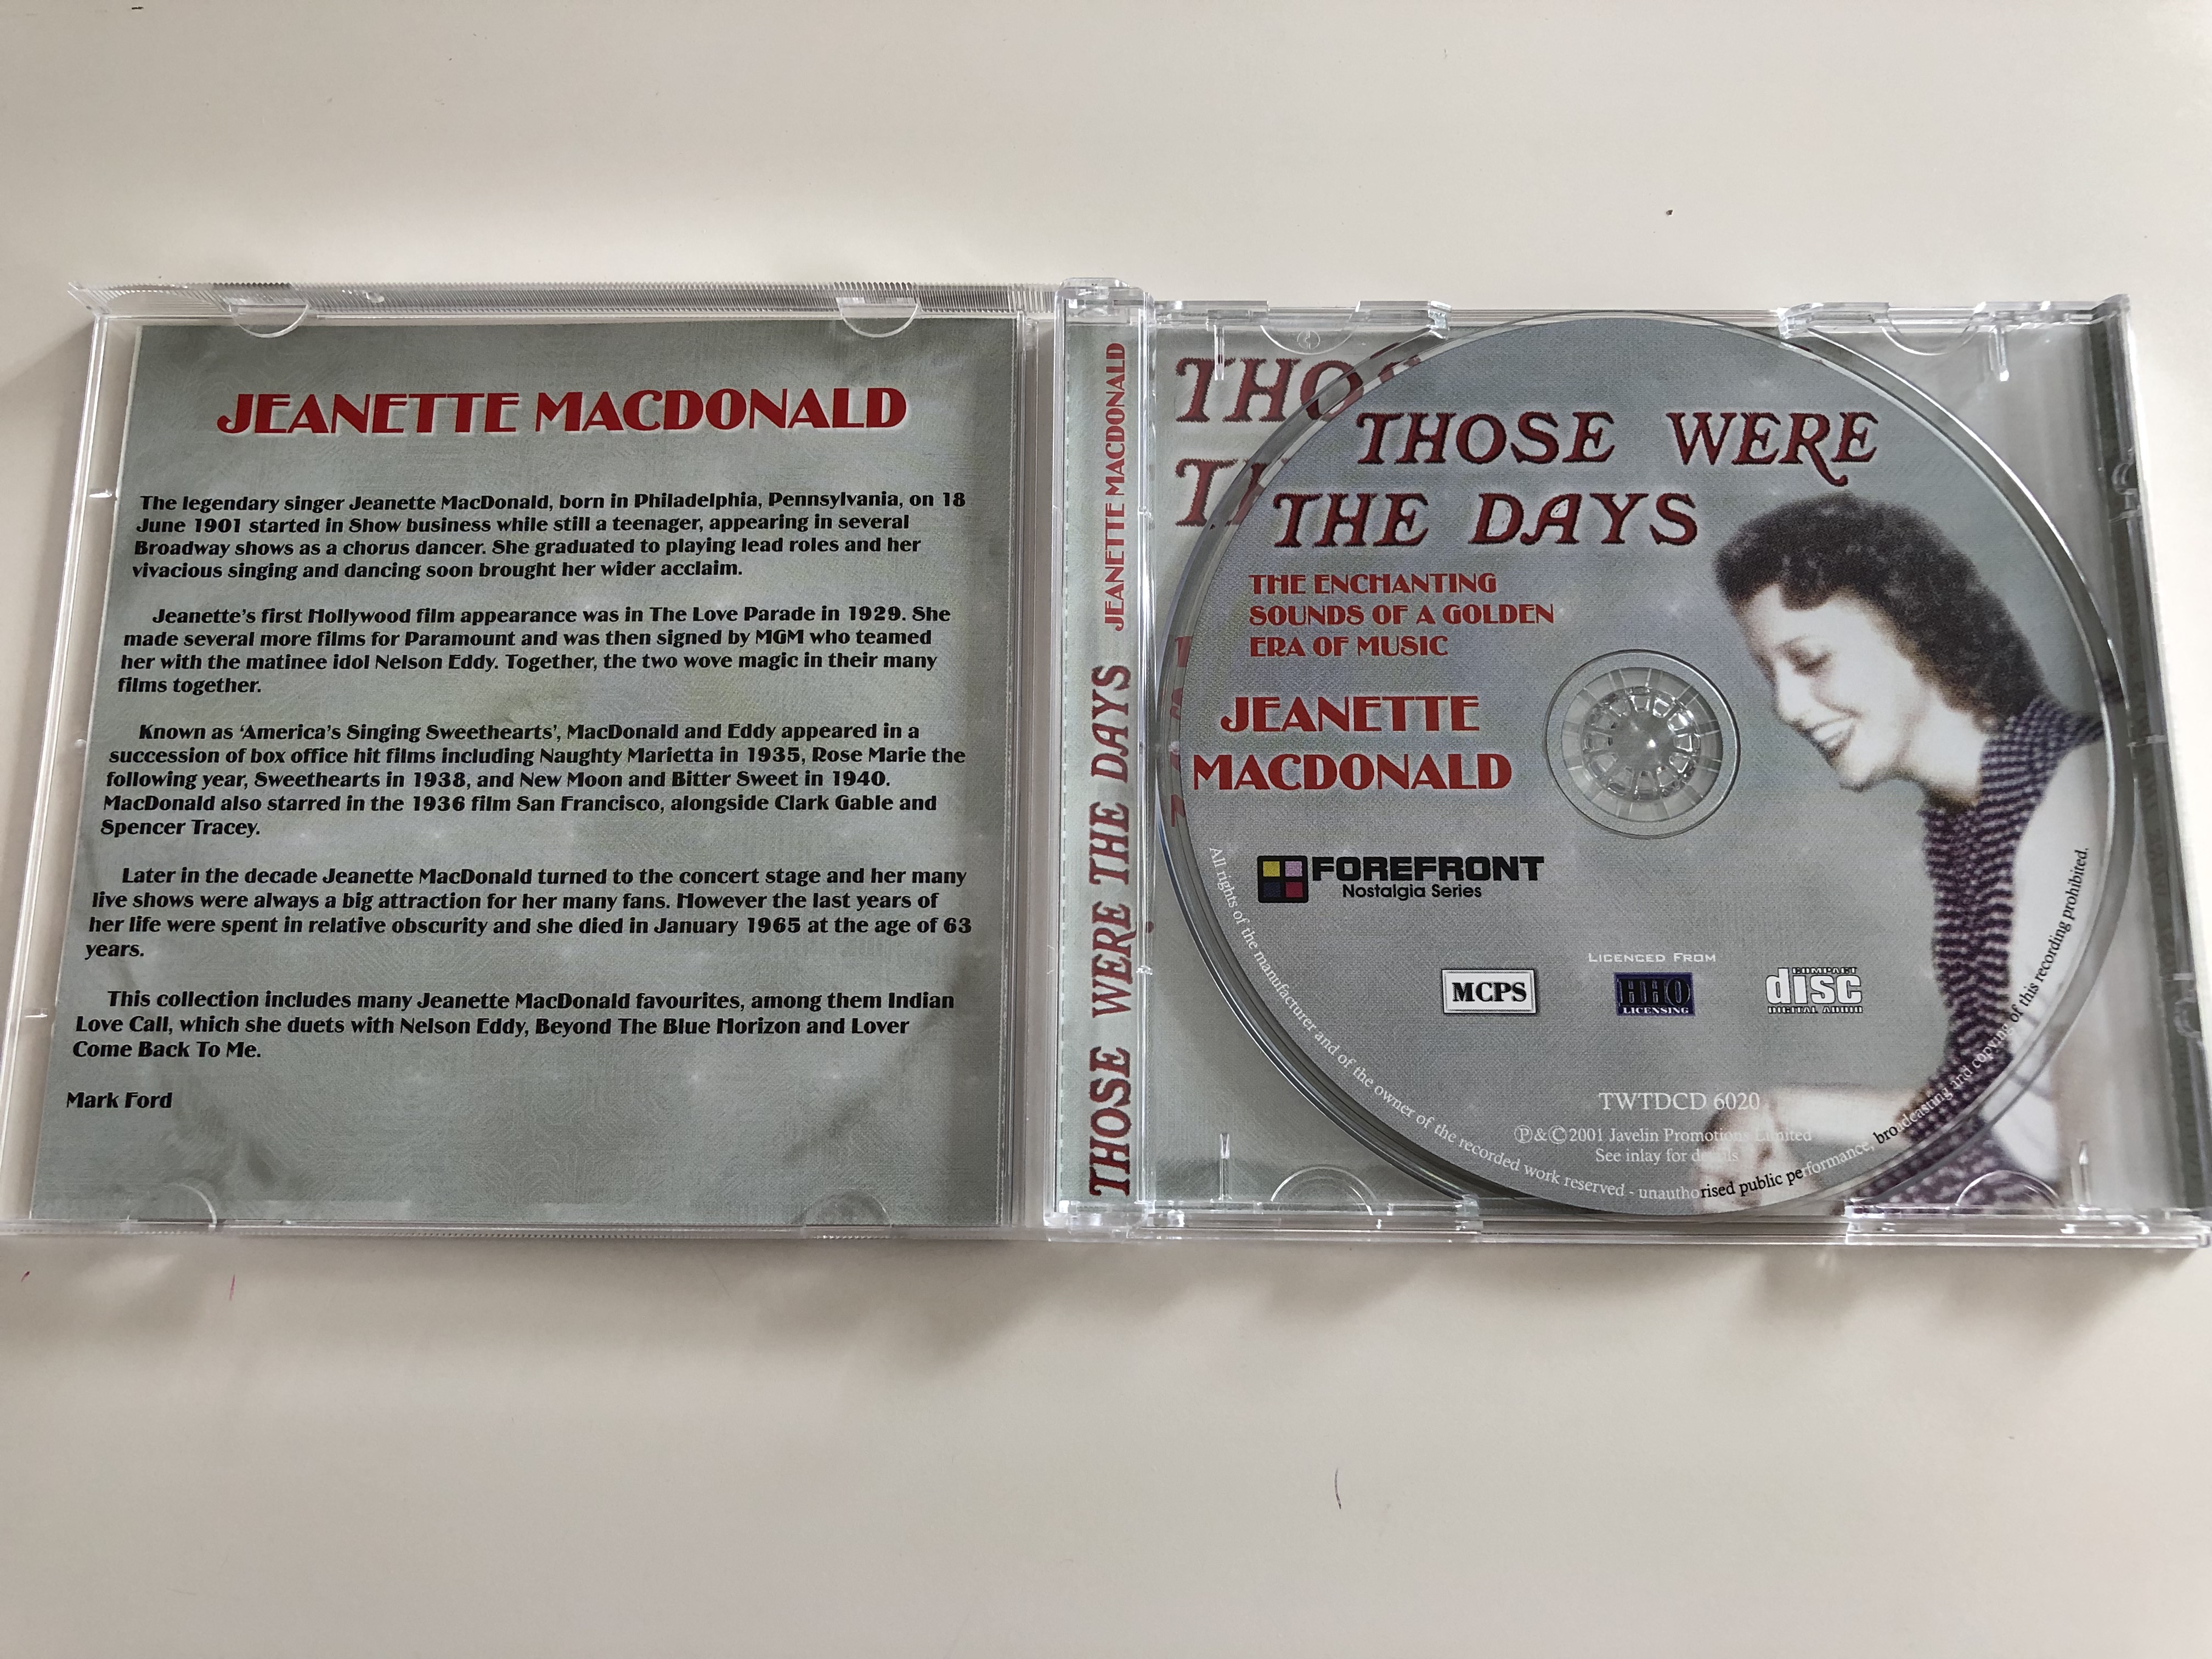 those-were-the-days-featuring-jeanette-macdonald-the-enchanting-sounds-of-a-golden-era-of-music-audio-cd-2001-forefront-nostalgia-series-2-.jpg